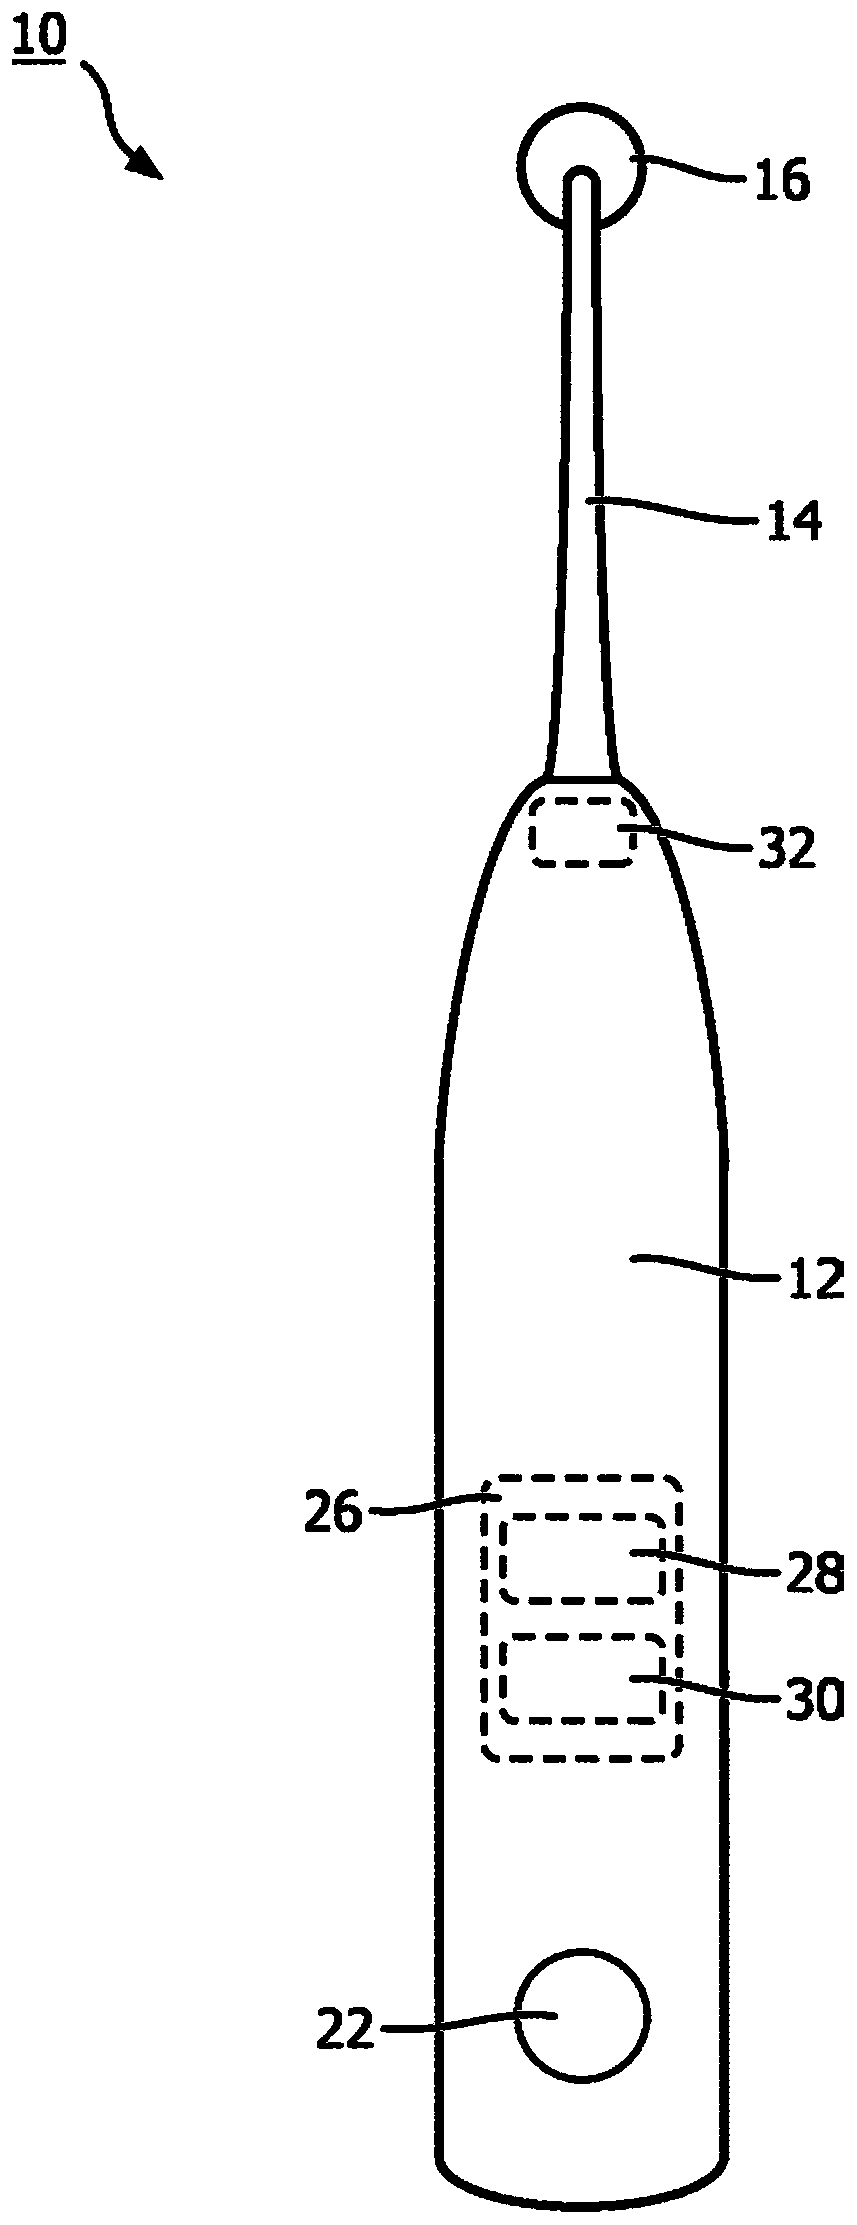 Methods and systems for dynamically adjusting an oral care routine based on interproximal space